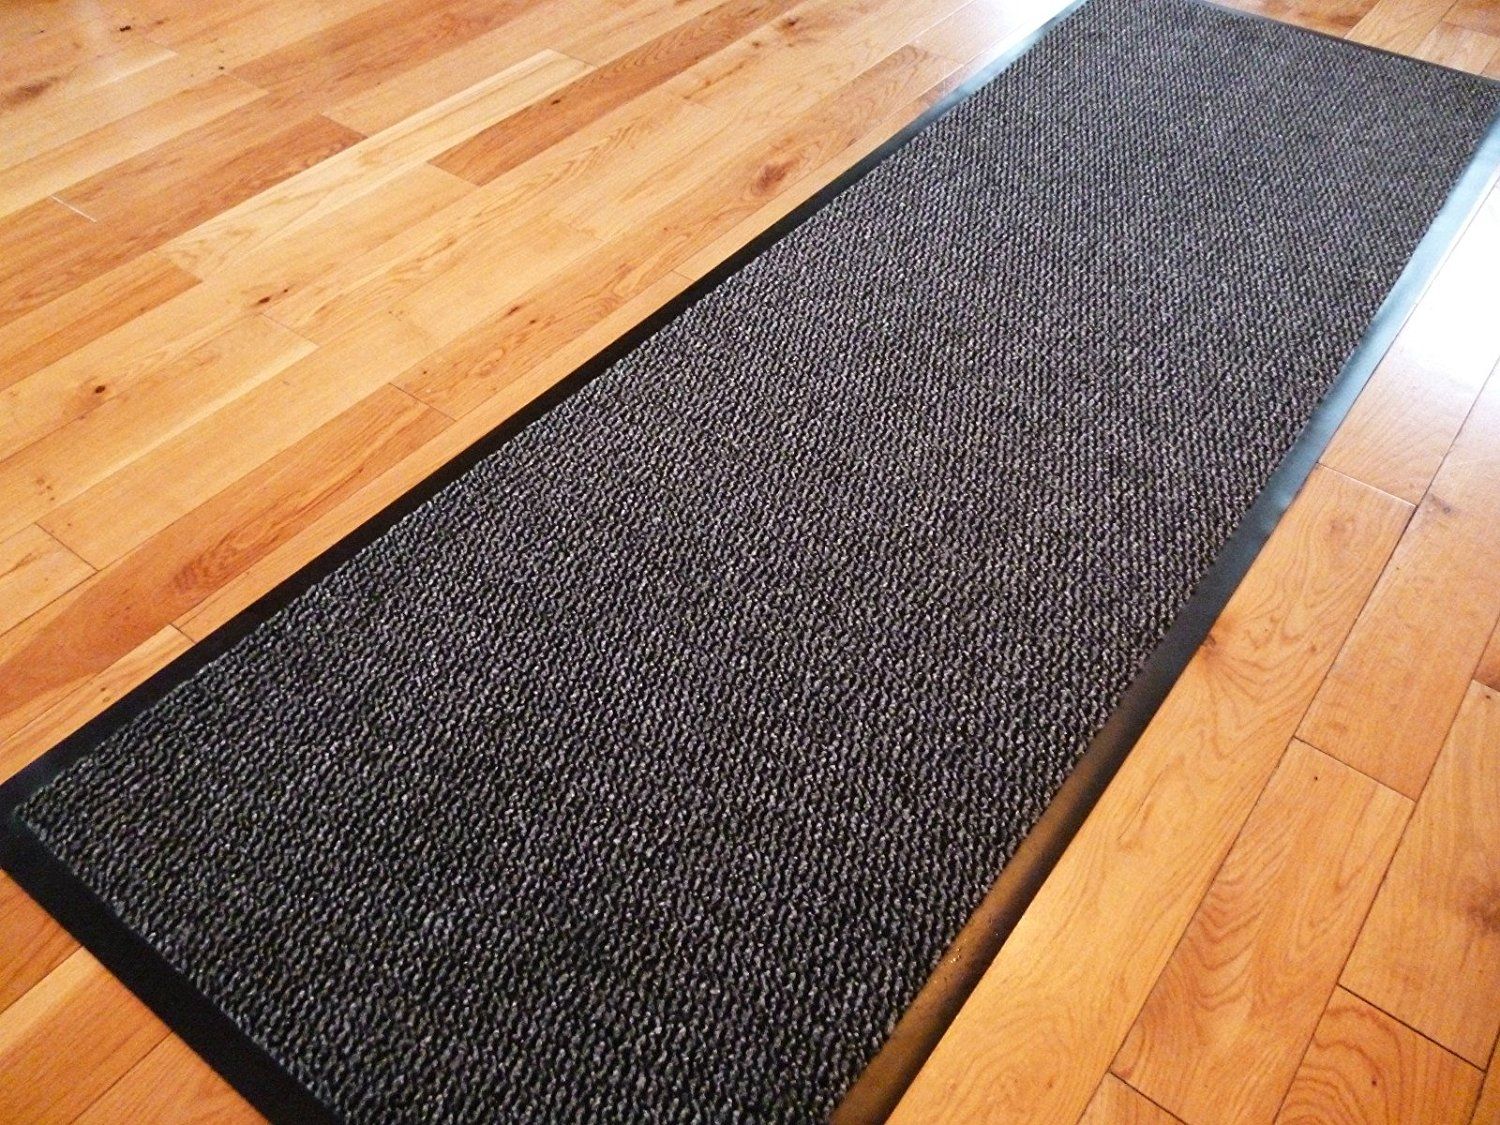 Carpet Runner 60cm X 160cm Dirt Stopper Greyblack Now Only Throughout Hall Runners And Door Mats (View 3 of 20)